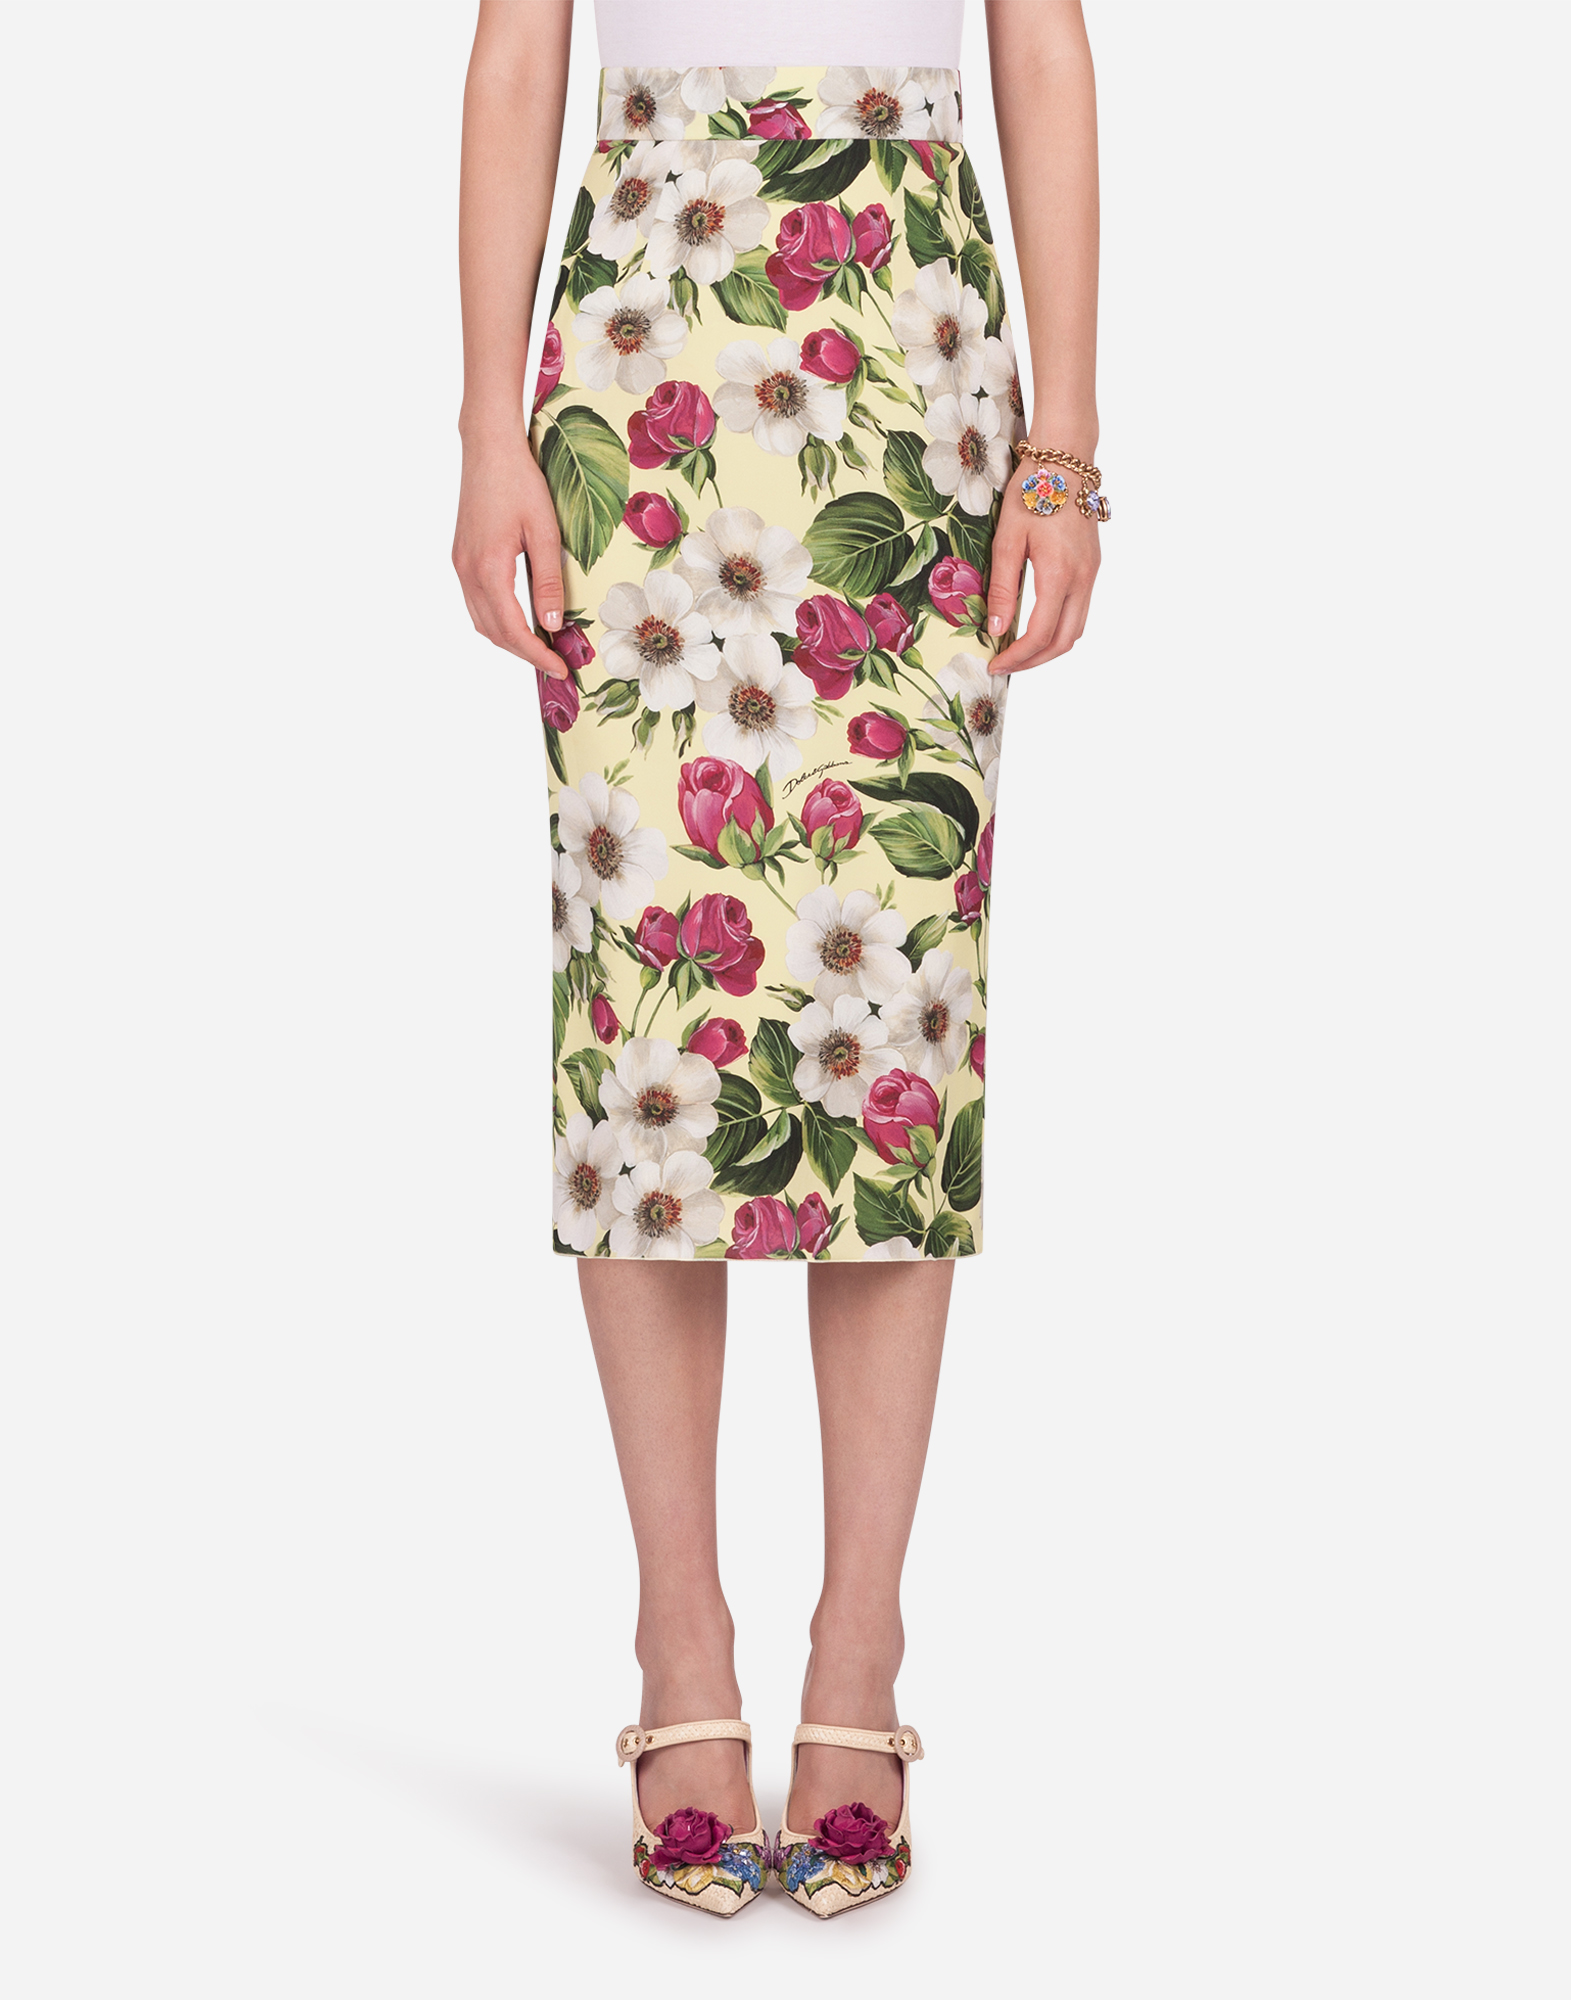 DOLCE & GABBANA MIDI TUBE SKIRT IN CHARMEUSE WITH SMALL ROSE PRINT